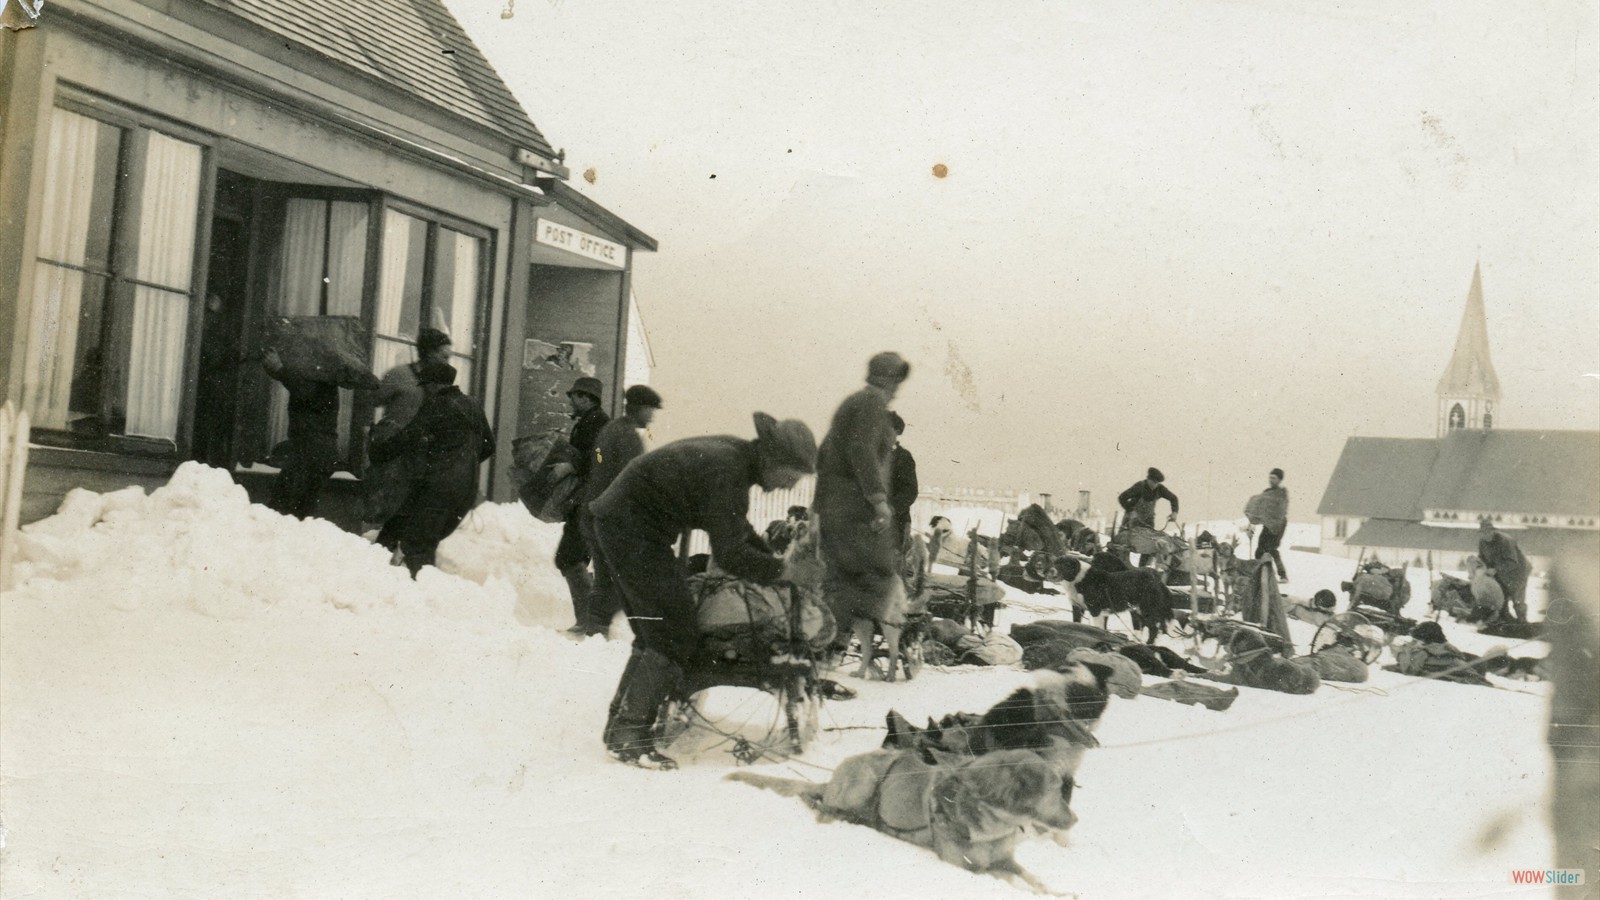 Mail being dropped off at the Post Office by dog sled team which was located at the Hiscock House 